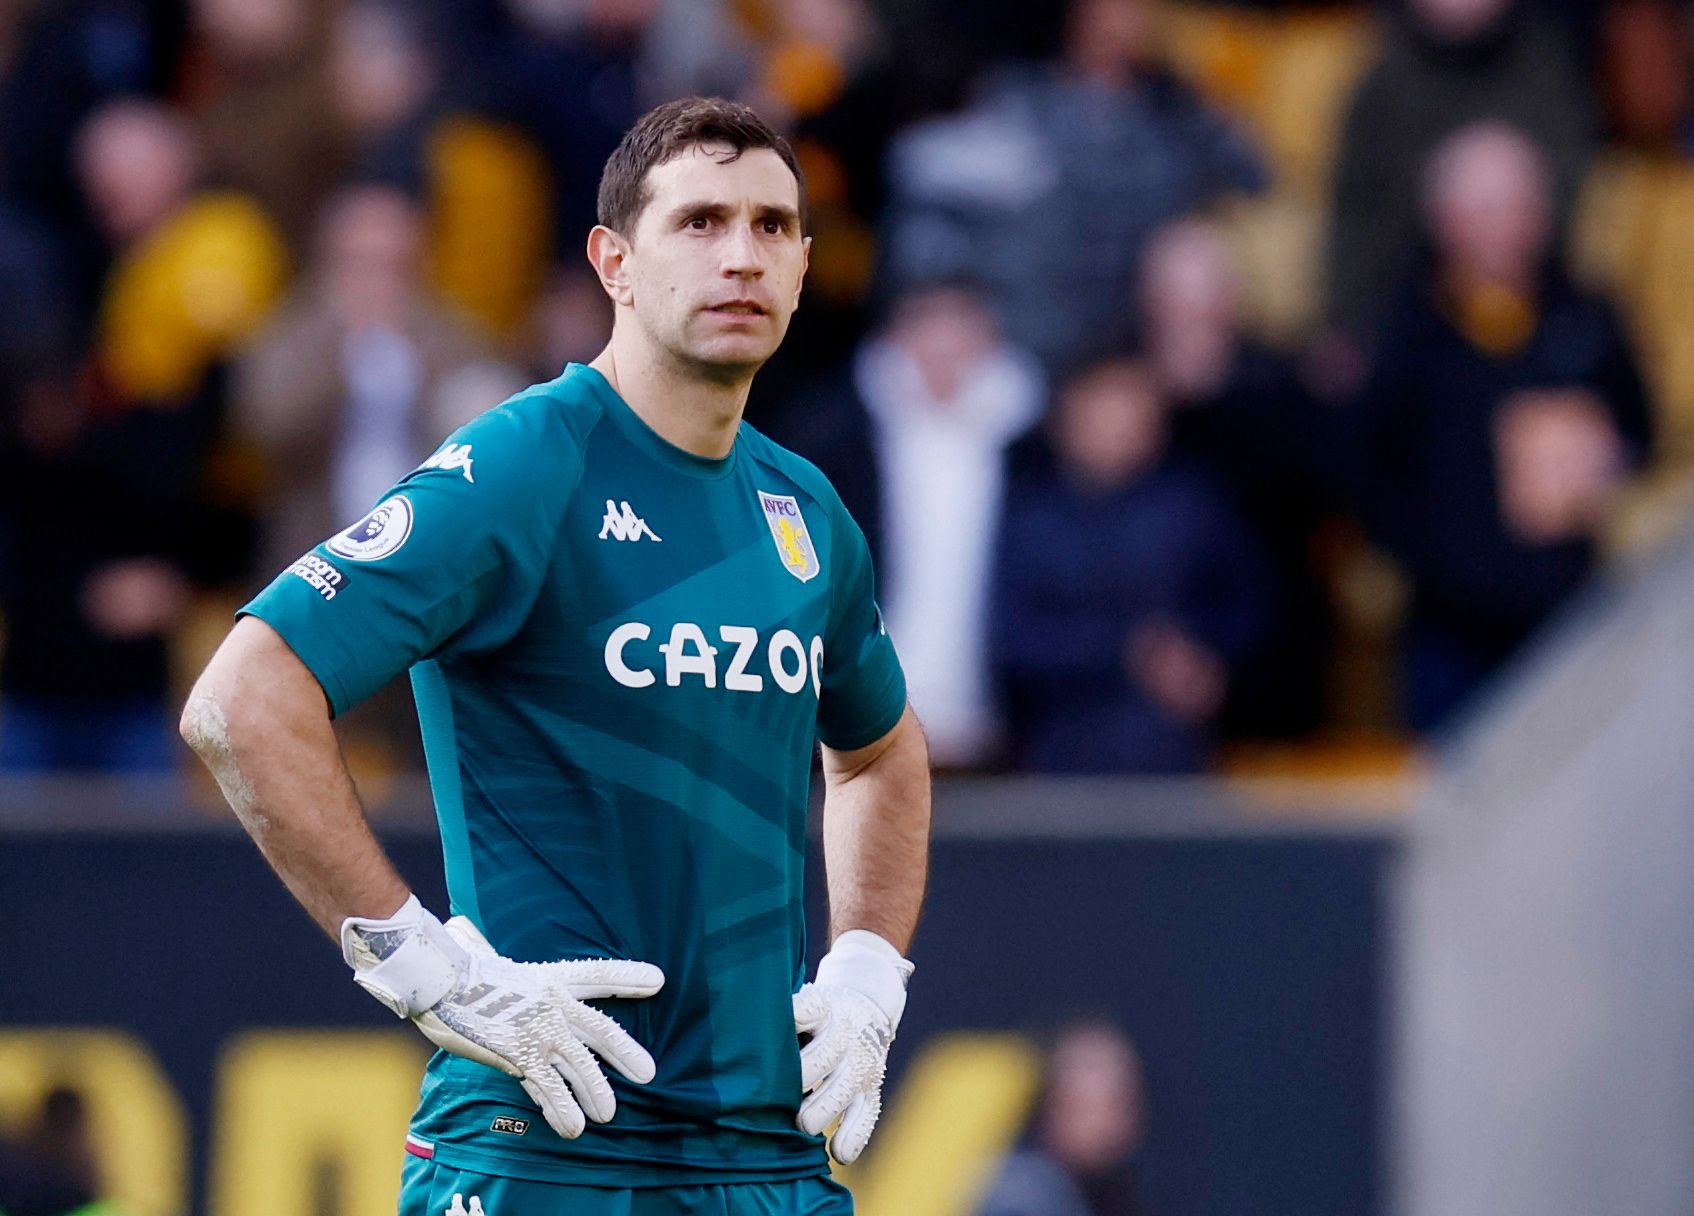 Soccer Football - Premier League - Wolverhampton Wanderers v Aston Villa - Molineux Stadium, Wolverhampton, Britain - April 2, 2022 Aston Villa's Emiliano Martinez looks dejected after the match Action Images via Reuters/Andrew Couldridge EDITORIAL USE ONLY. No use with unauthorized audio, video, data, fixture lists, club/league logos or 'live' services. Online in-match use limited to 75 images, no video emulation. No use in betting, games or single club /league/player publications.  Please cont